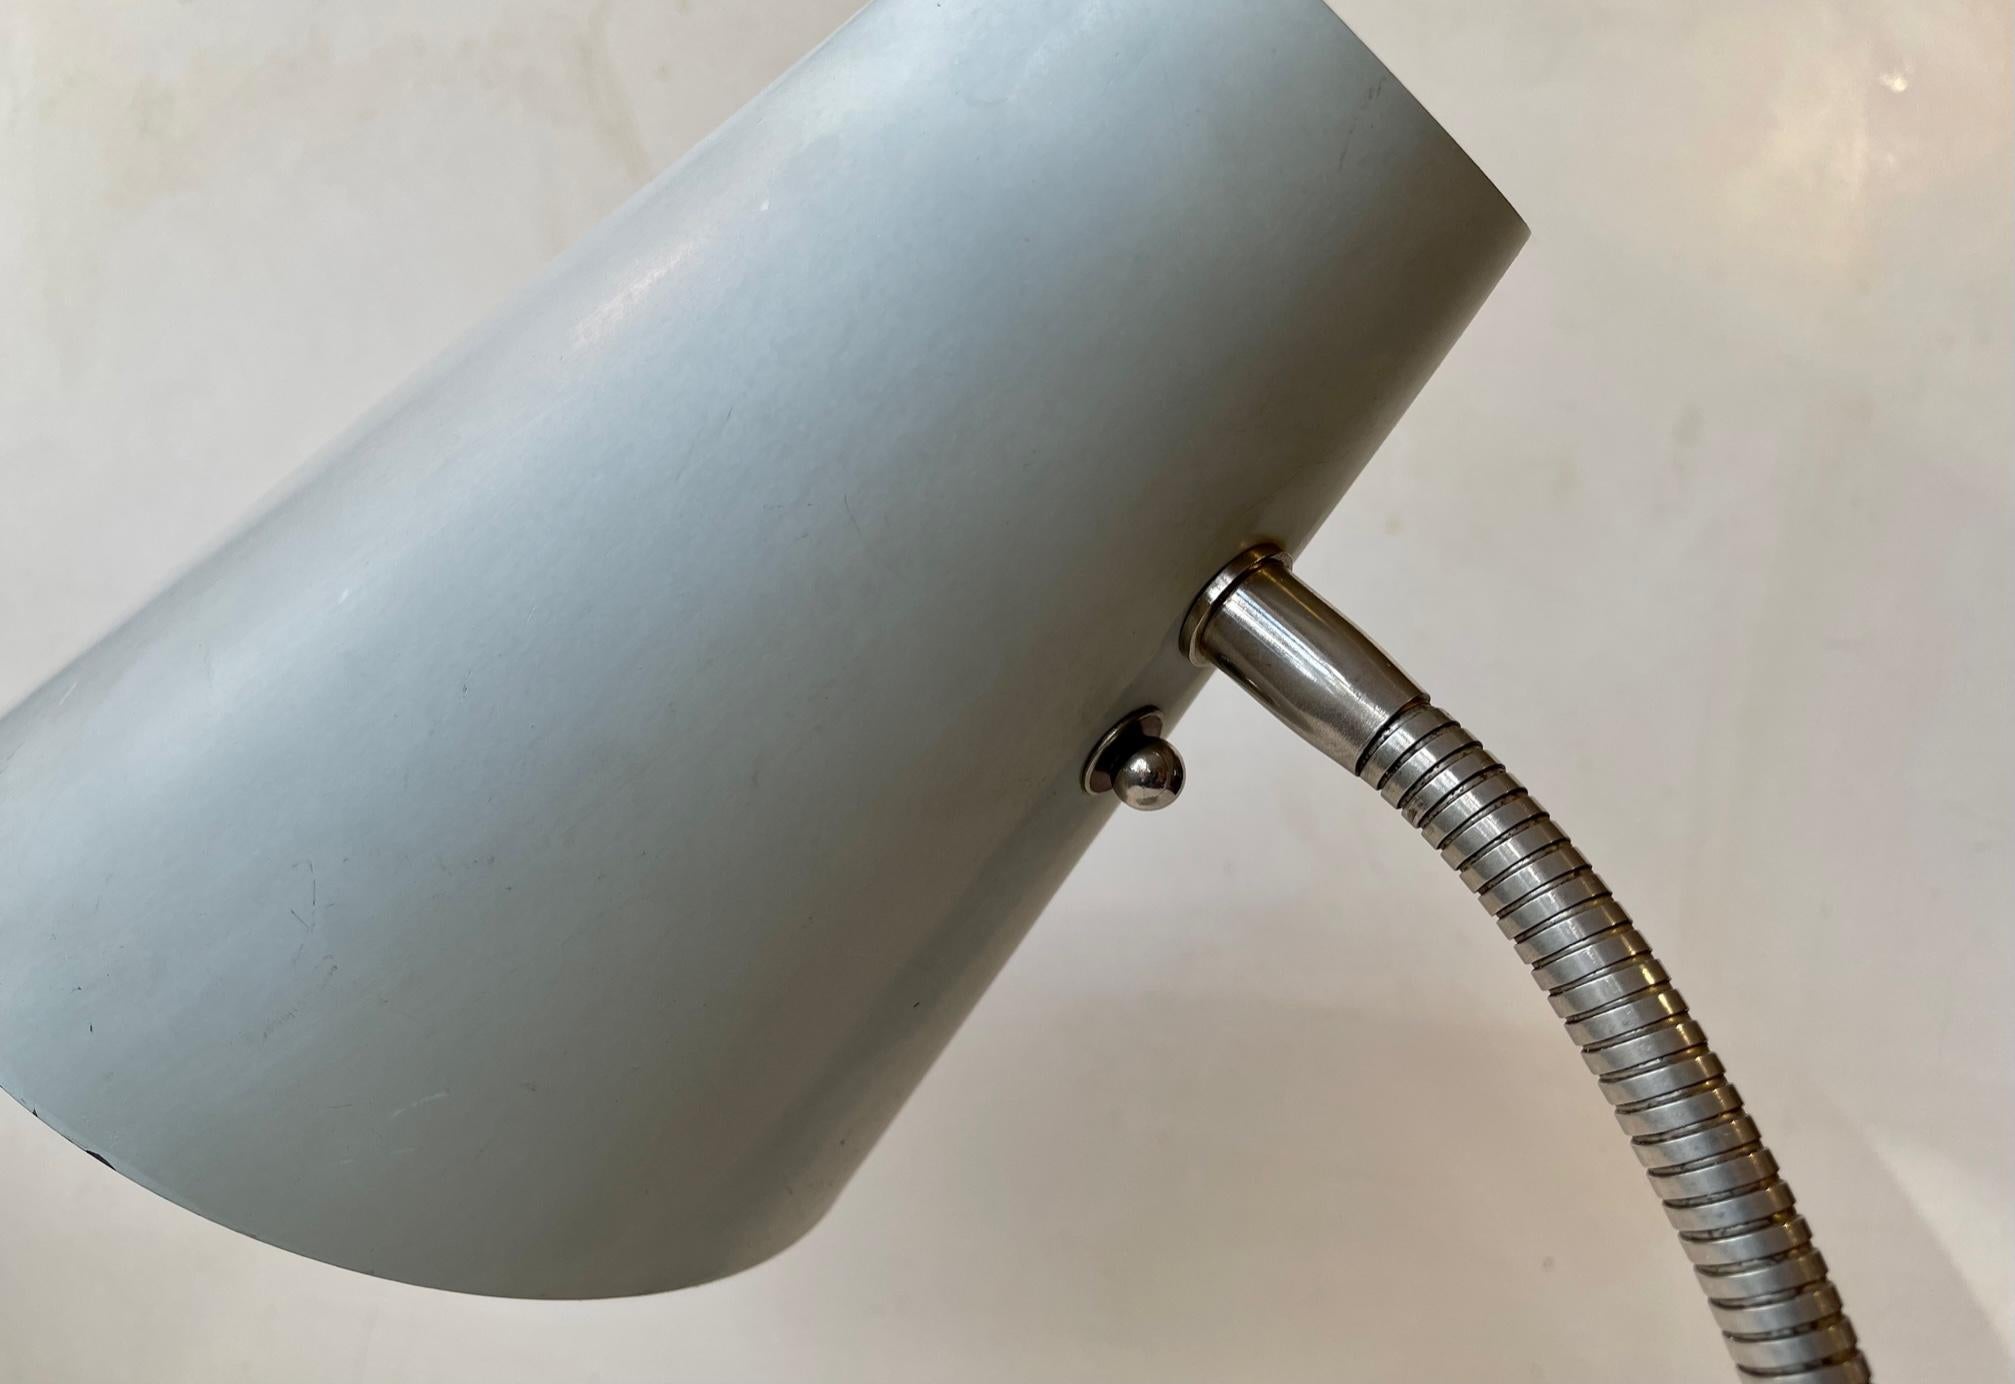 Powder-Coated ASEA Sweden Adjustable Grey Industrial Table Lamp, 1950s For Sale